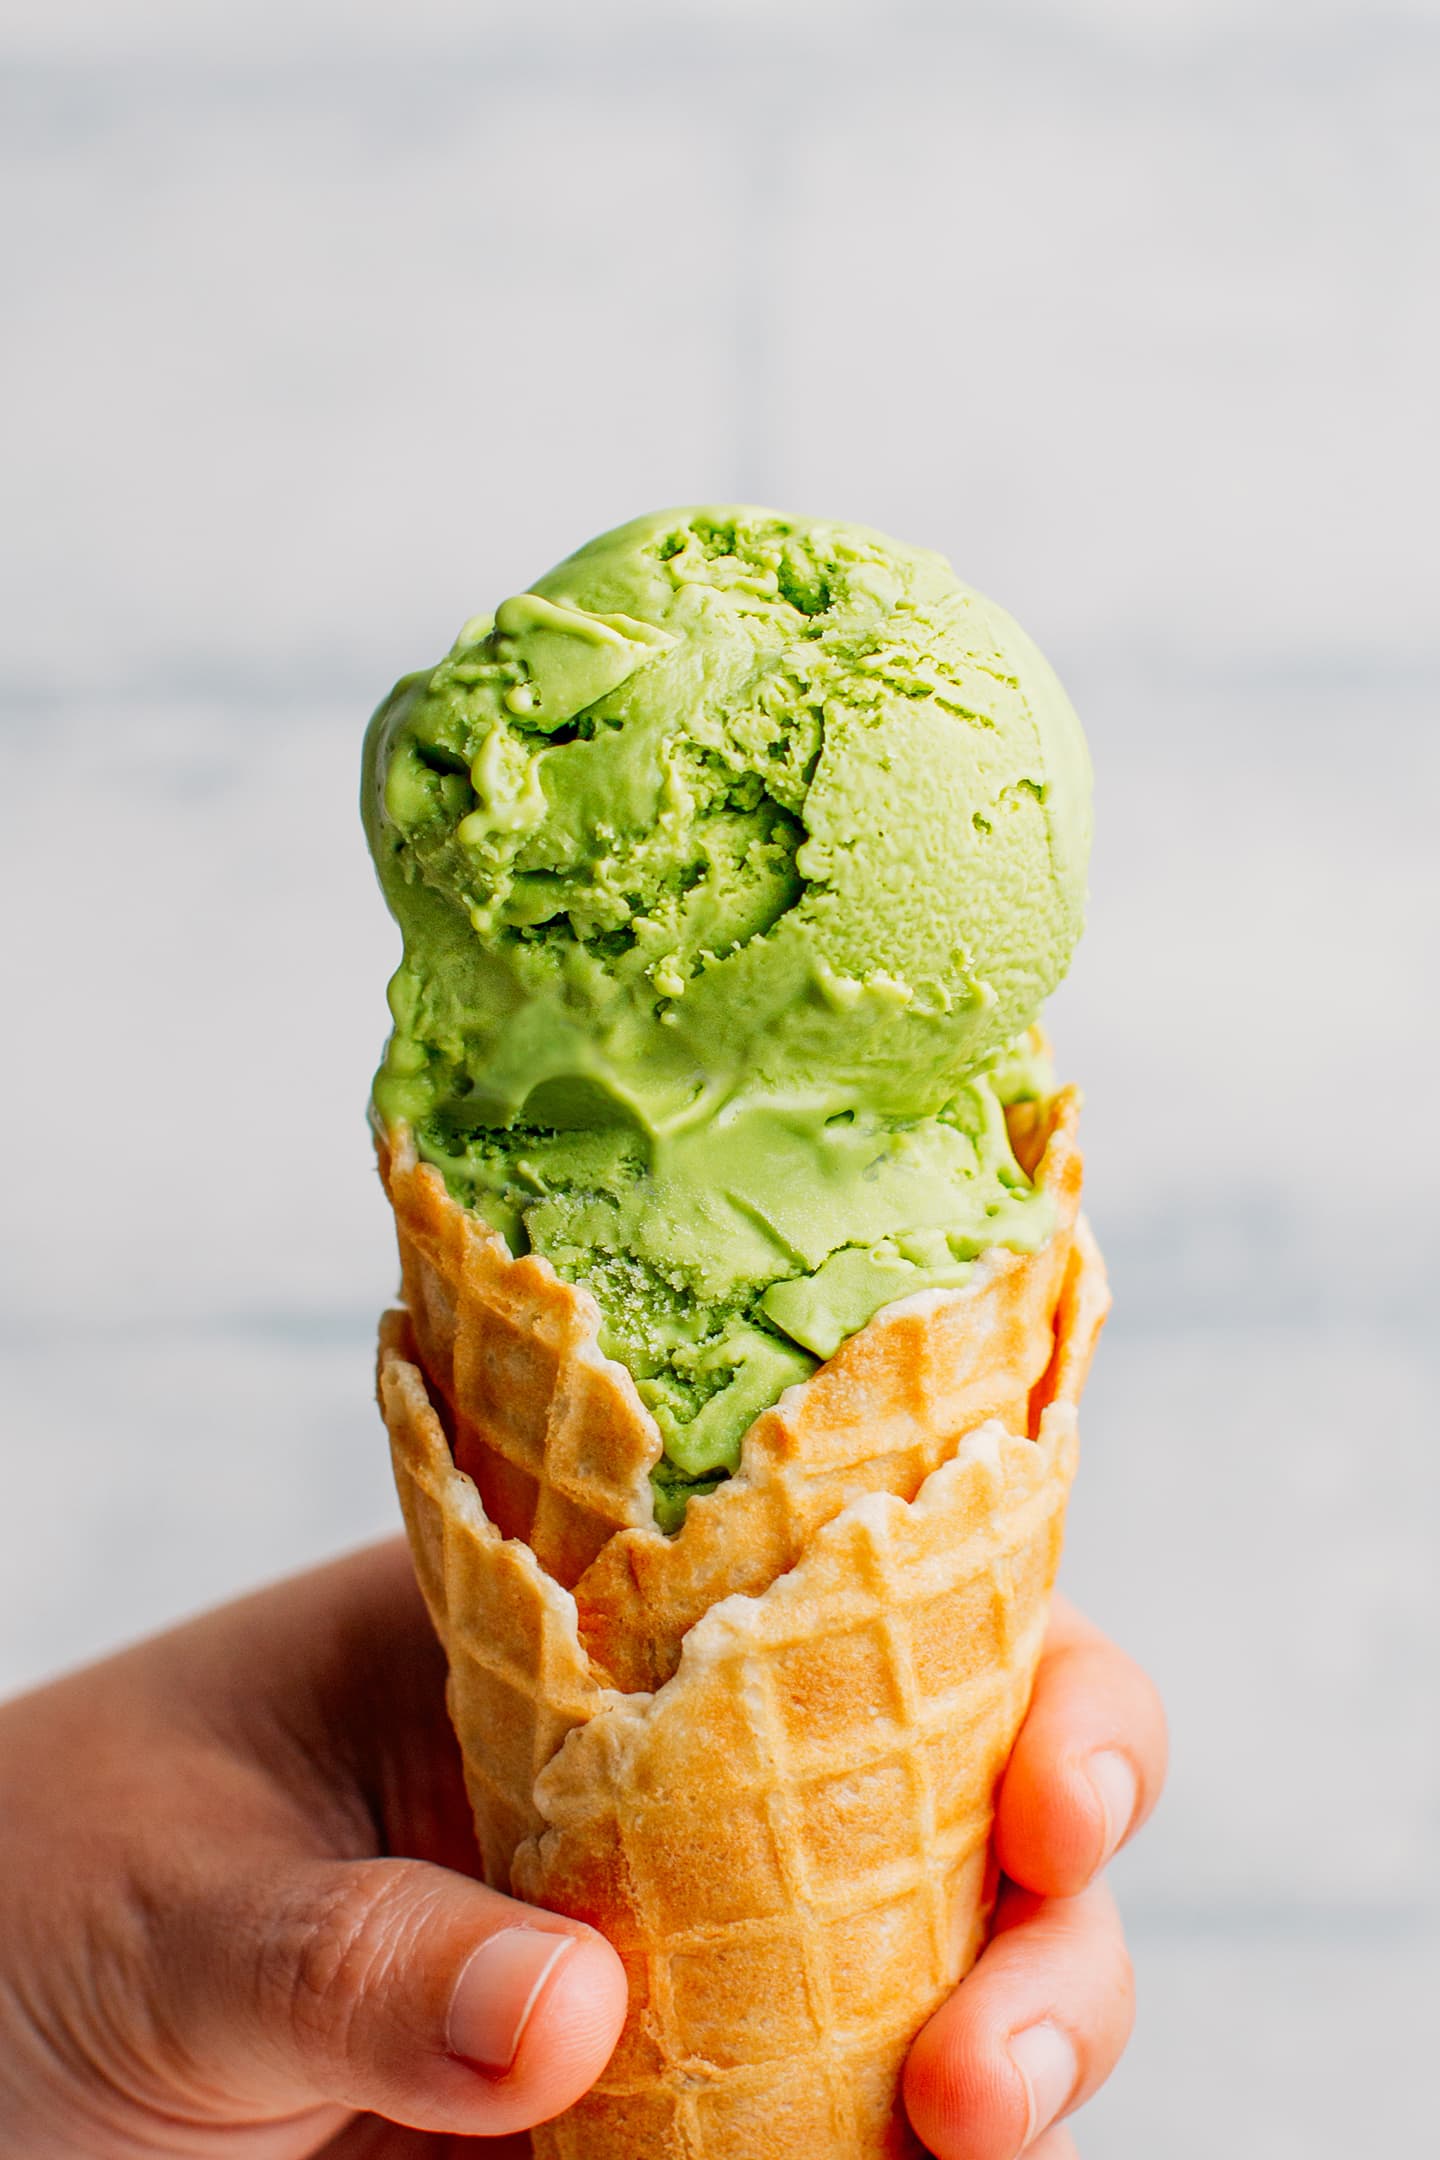 Two scoops of matcha ice cream in a waffle cone.